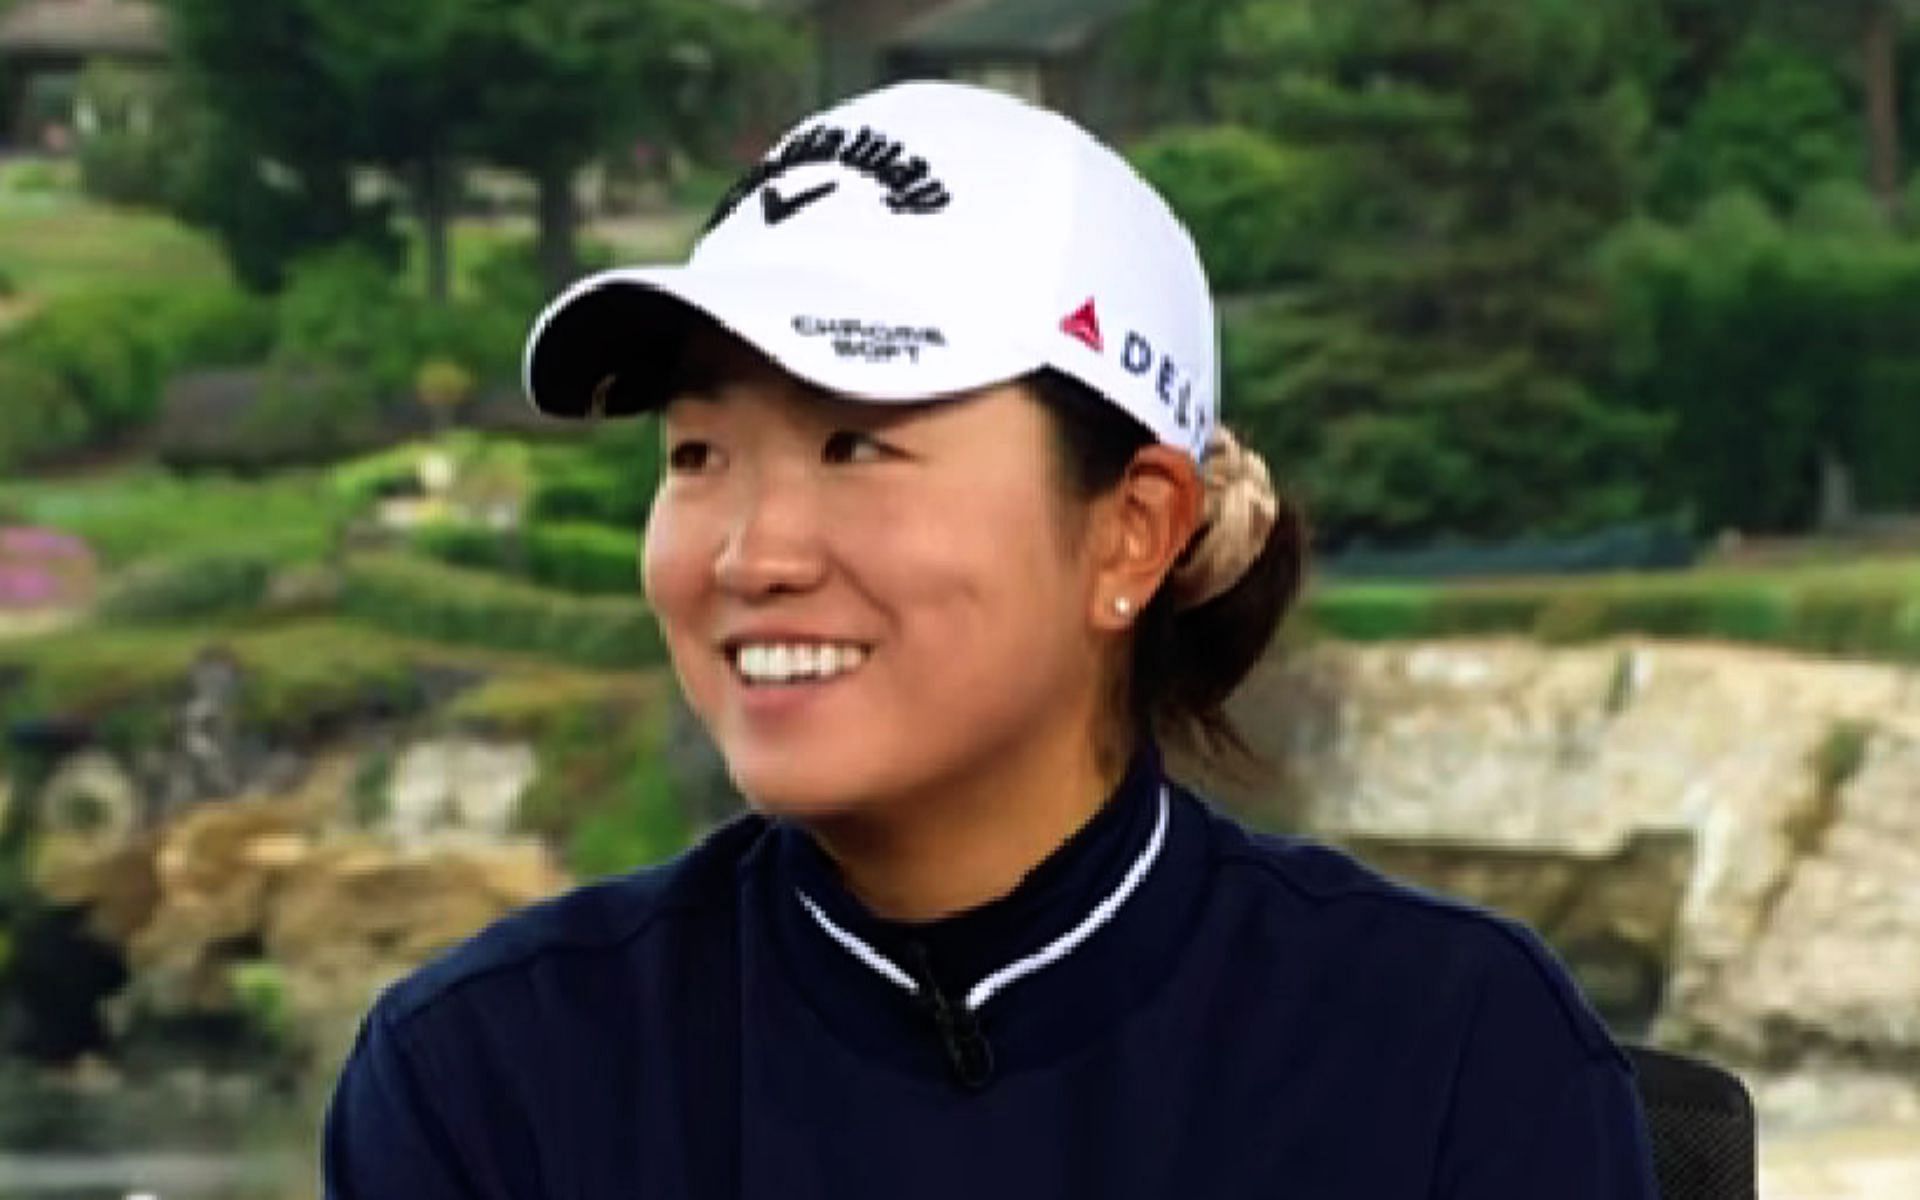 Rose Zhang during her press conference from Peeble Beach on Tuesday (Image via Twitter @GolfChannel).